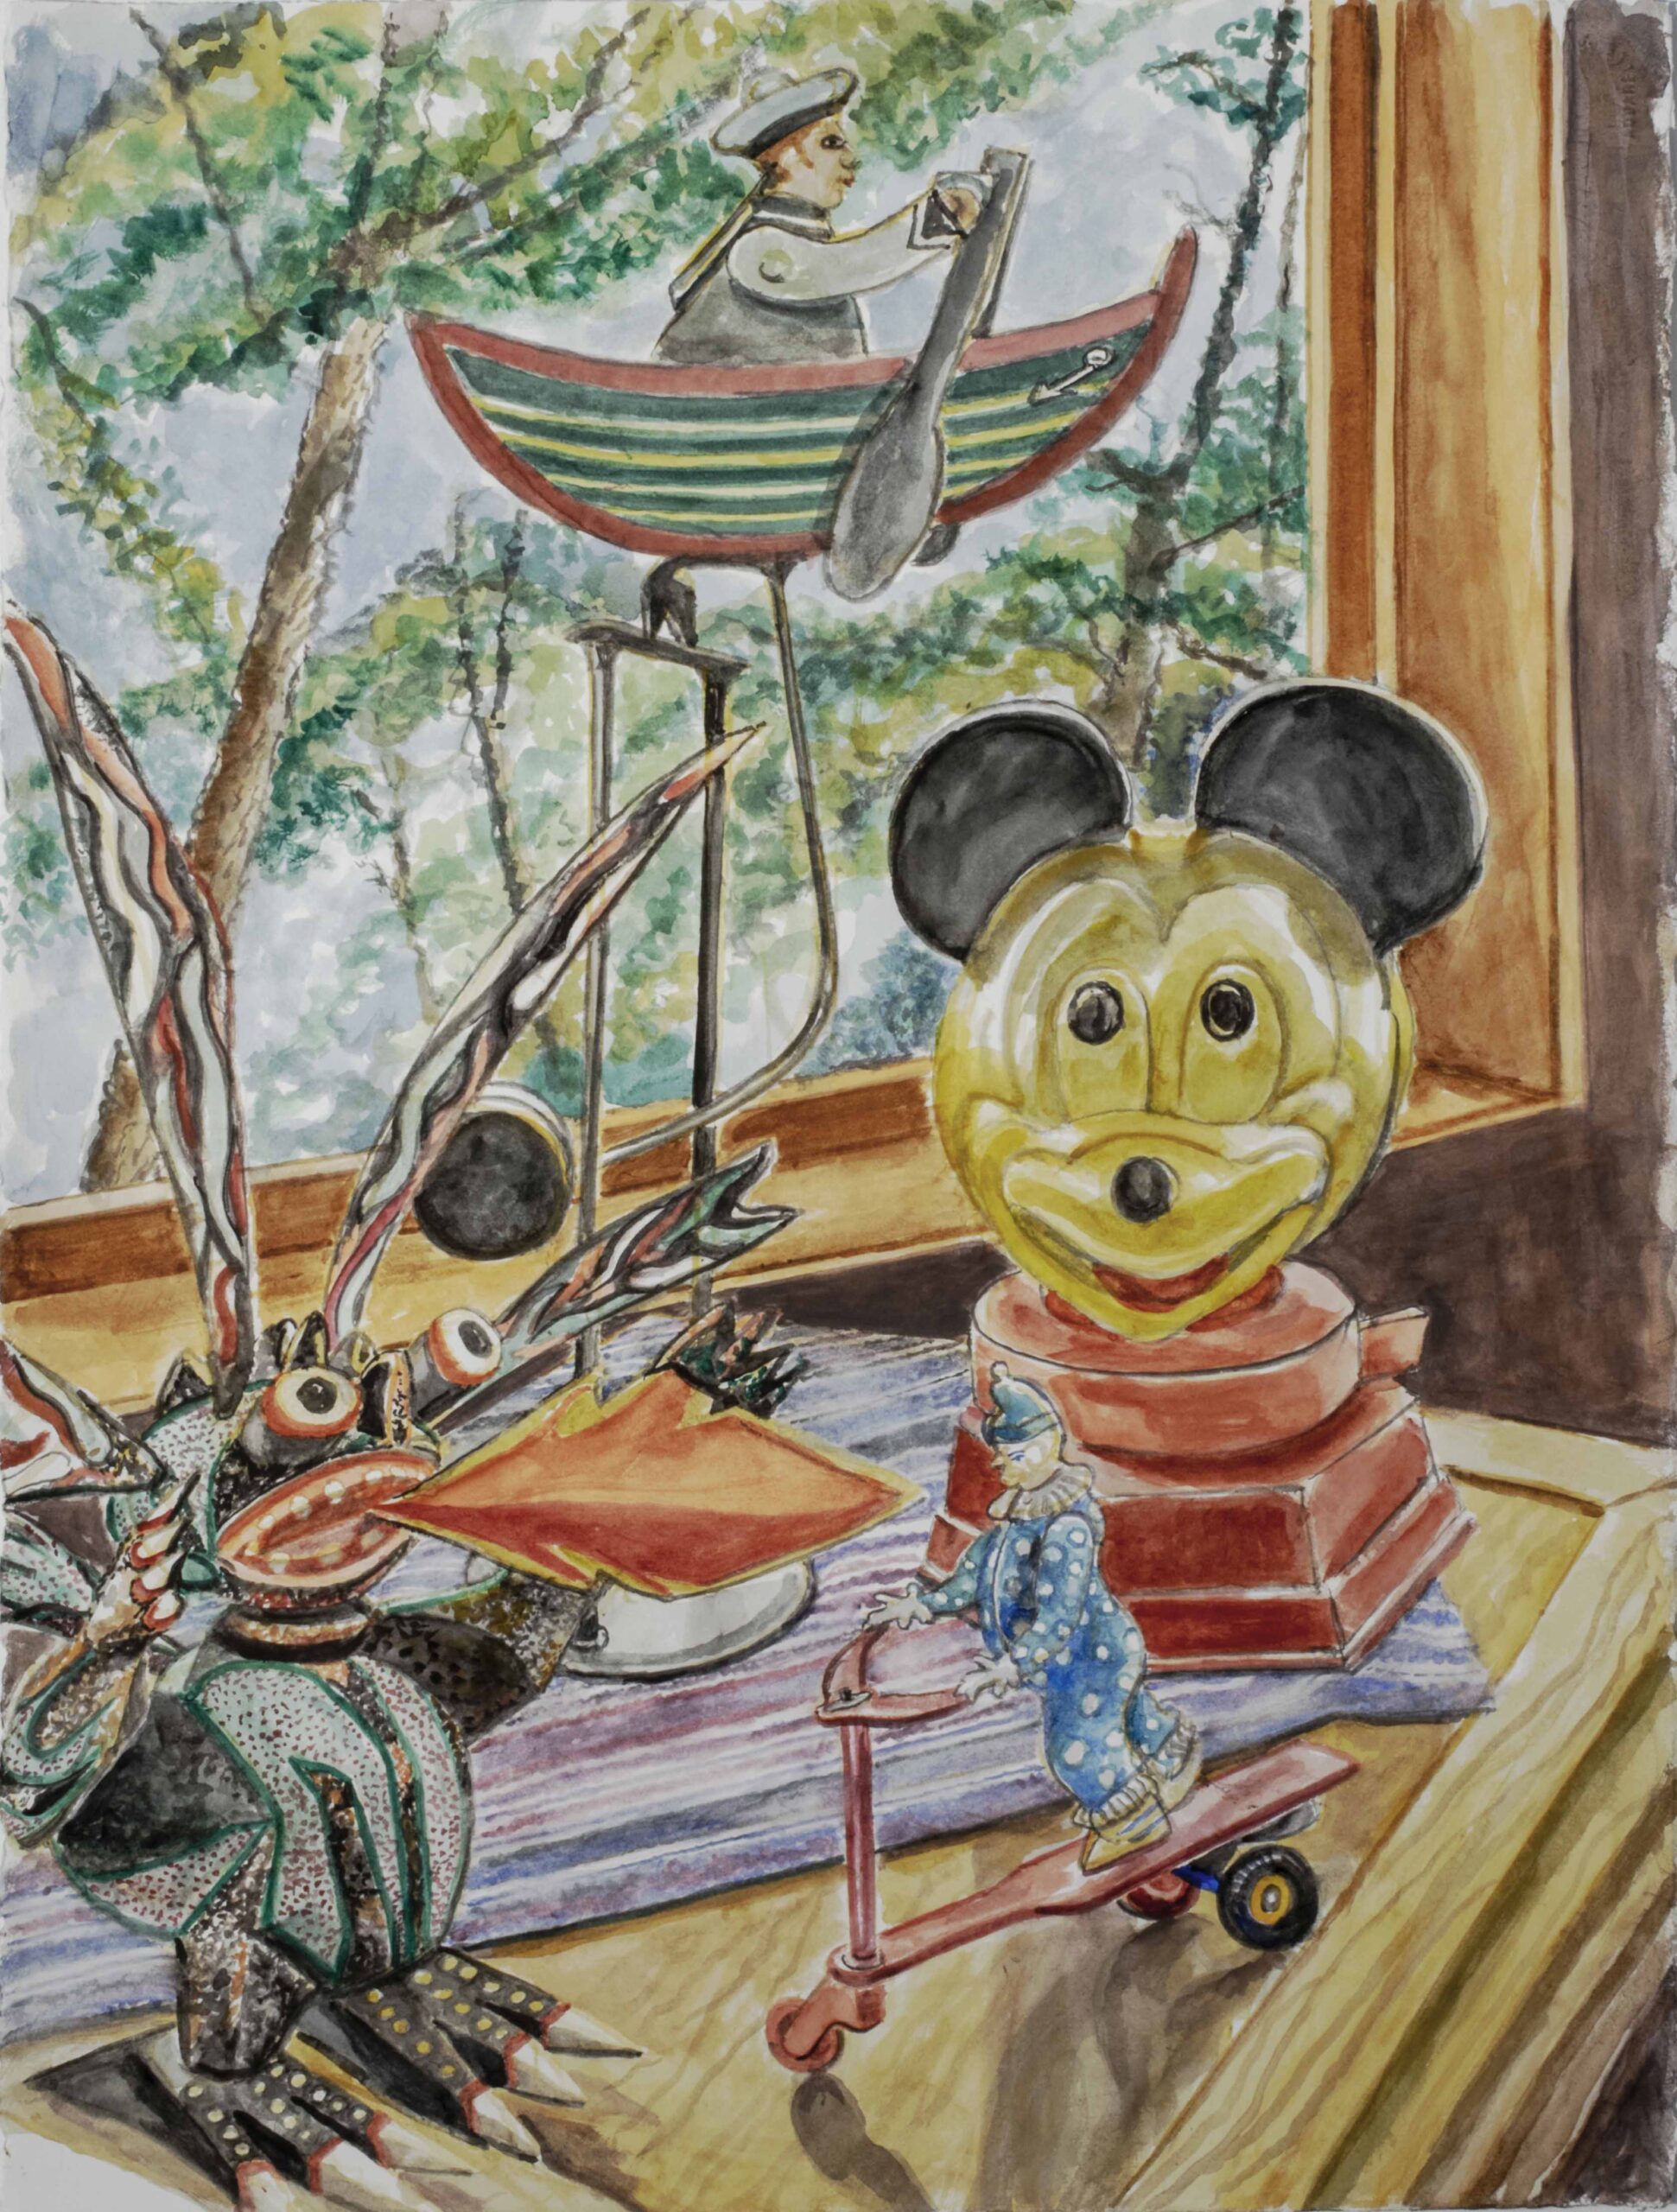 2021 Toys Watercolor on Paper 30 x 23